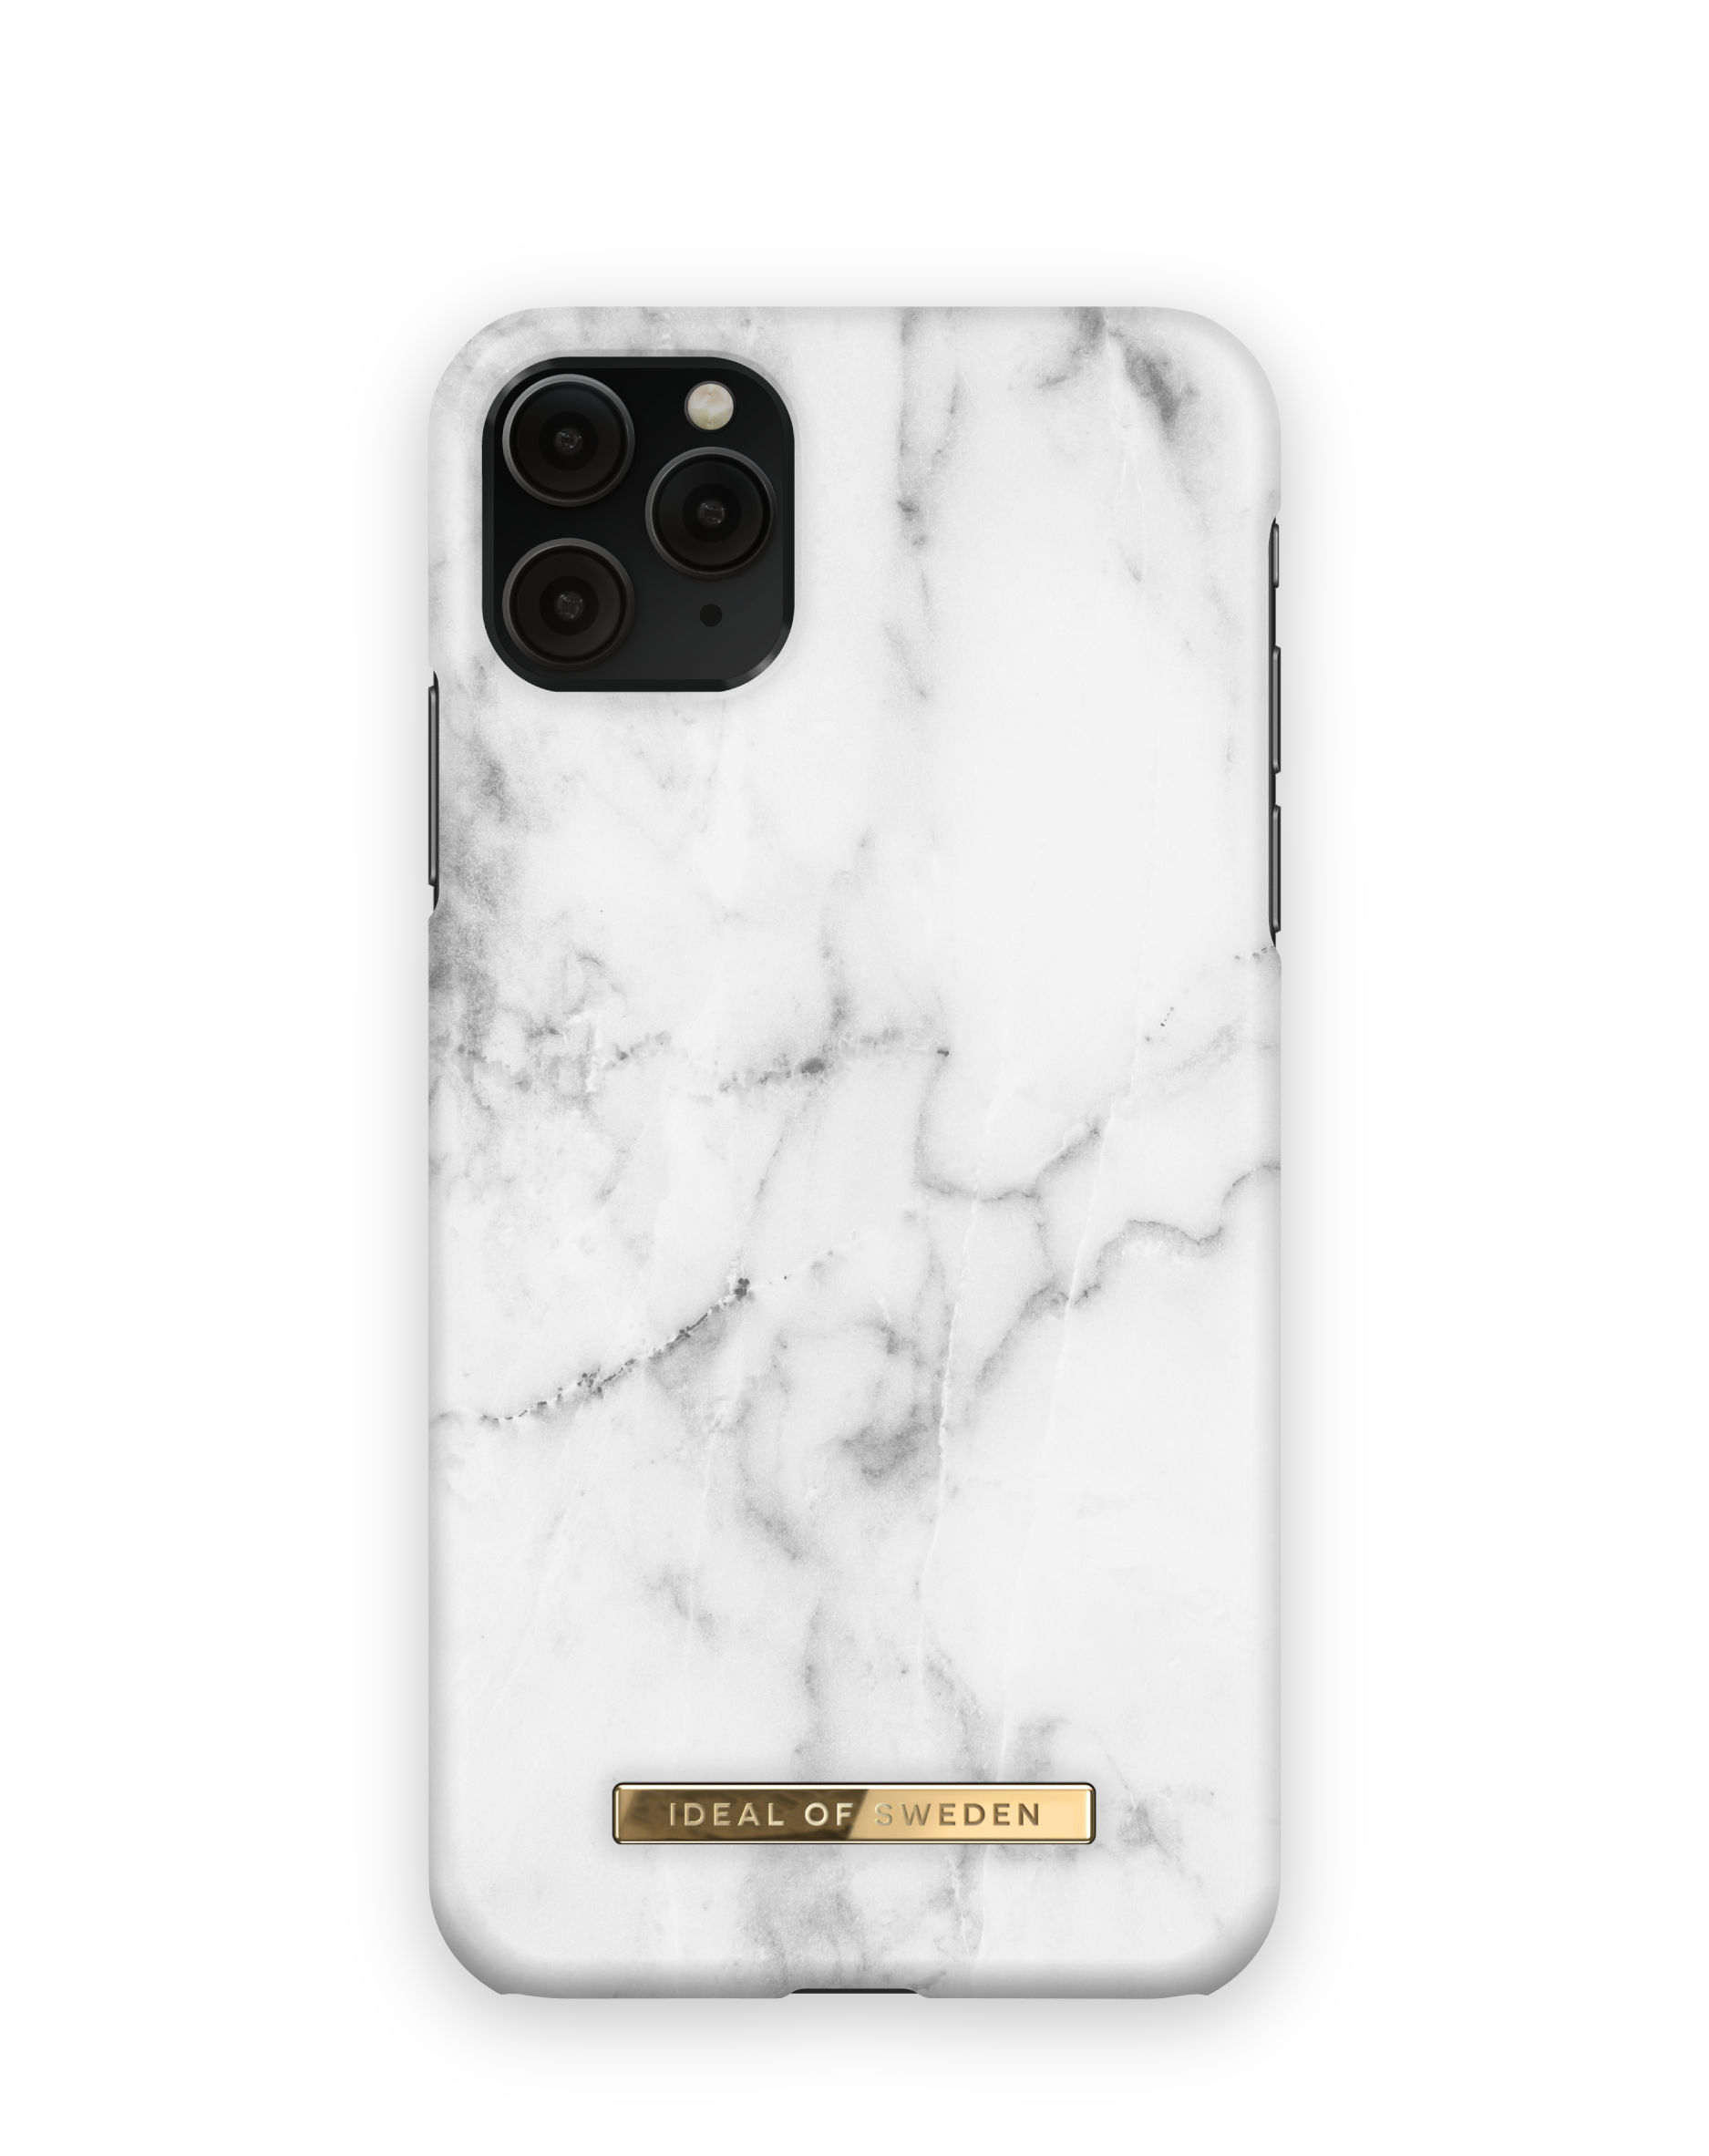 IDEAL OF SWEDEN Backcover, Pro Apple Apple IDFC-I1965-22, 11 XS Max, Marble Apple, iPhone Max, iPhone White